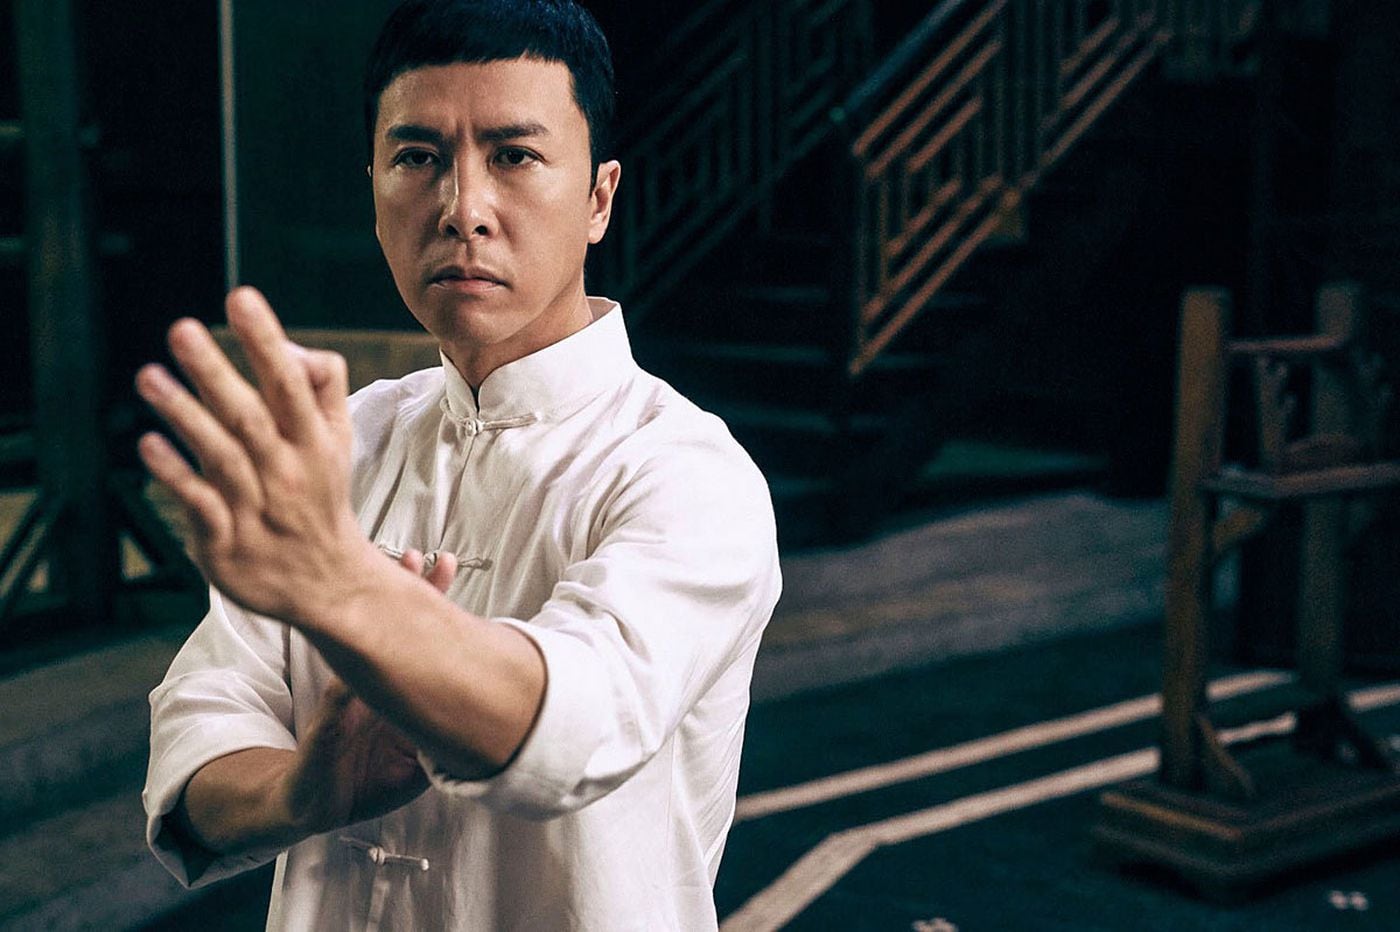 Review: 'Ip Man 3' doesn't live up to its predecessors